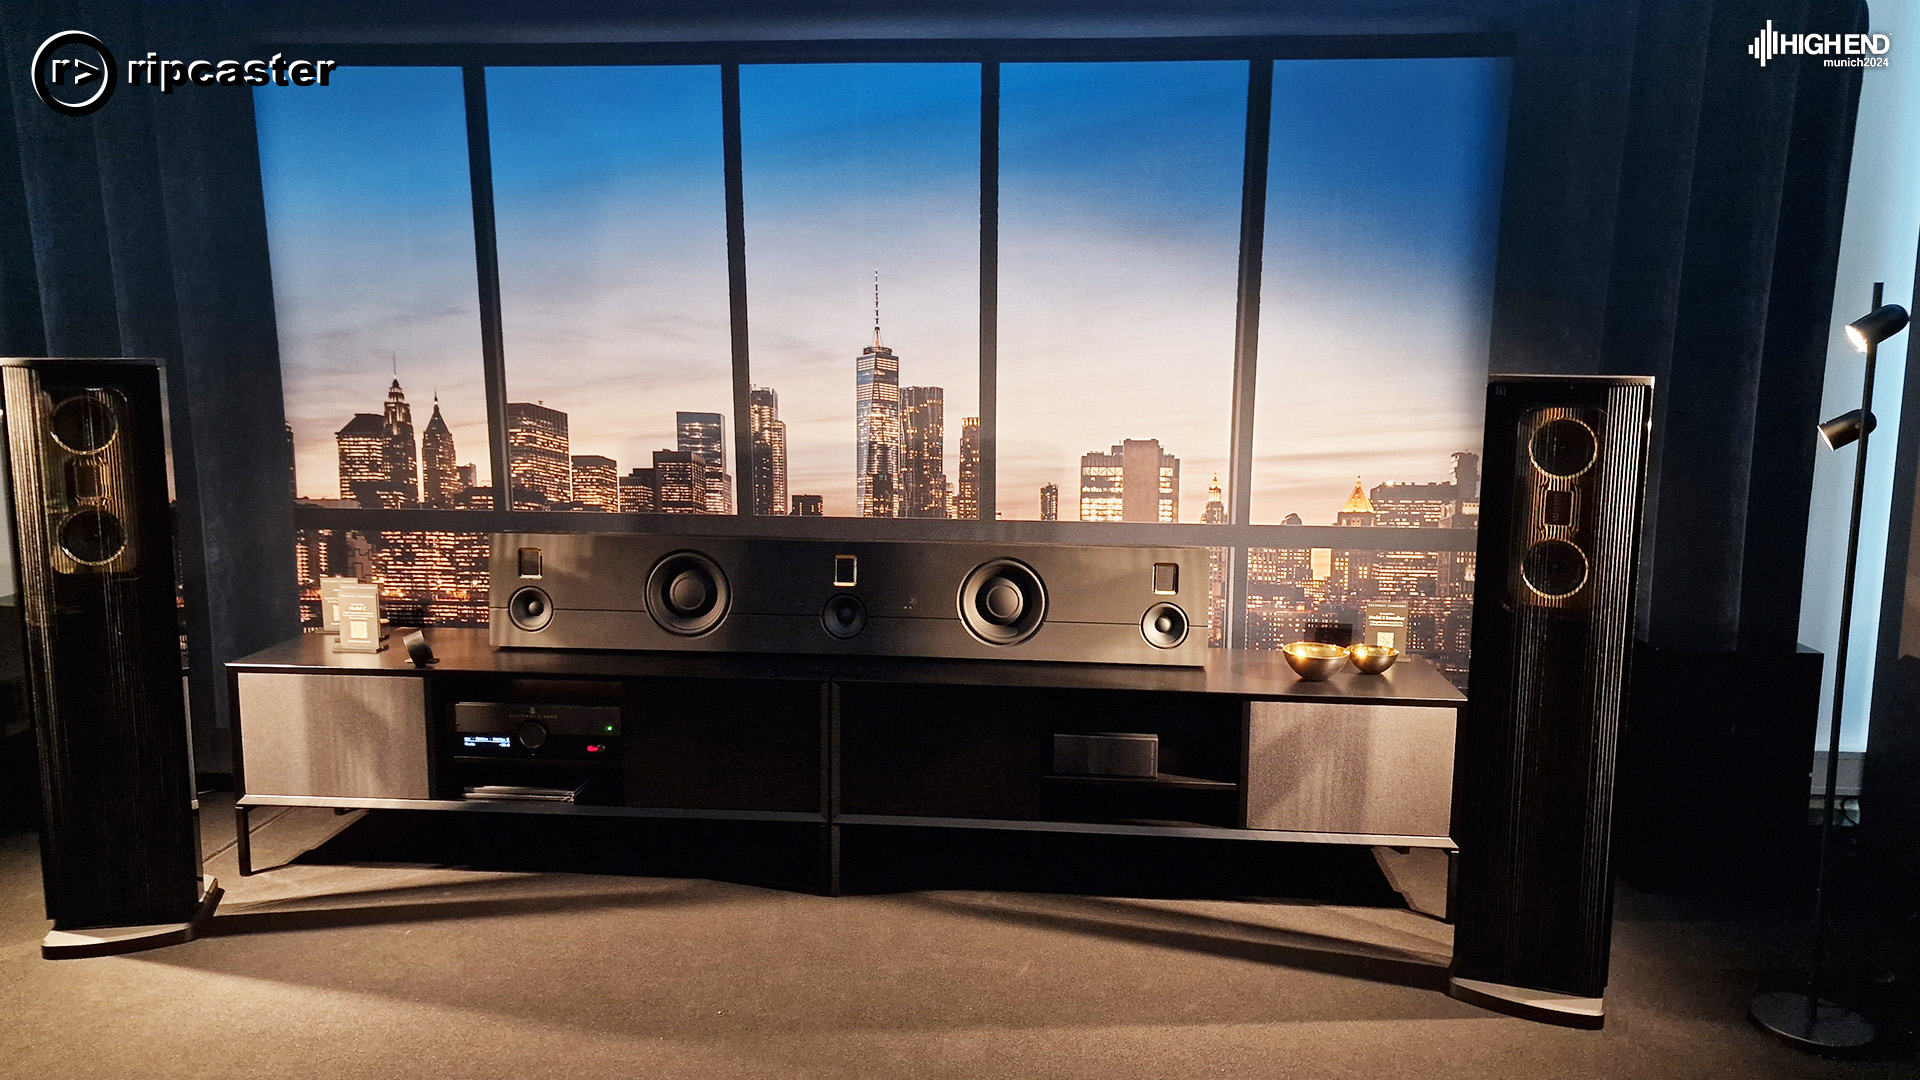 A pair of black floorstanding speakers in front of a large city backdrop with HiFi equipment between